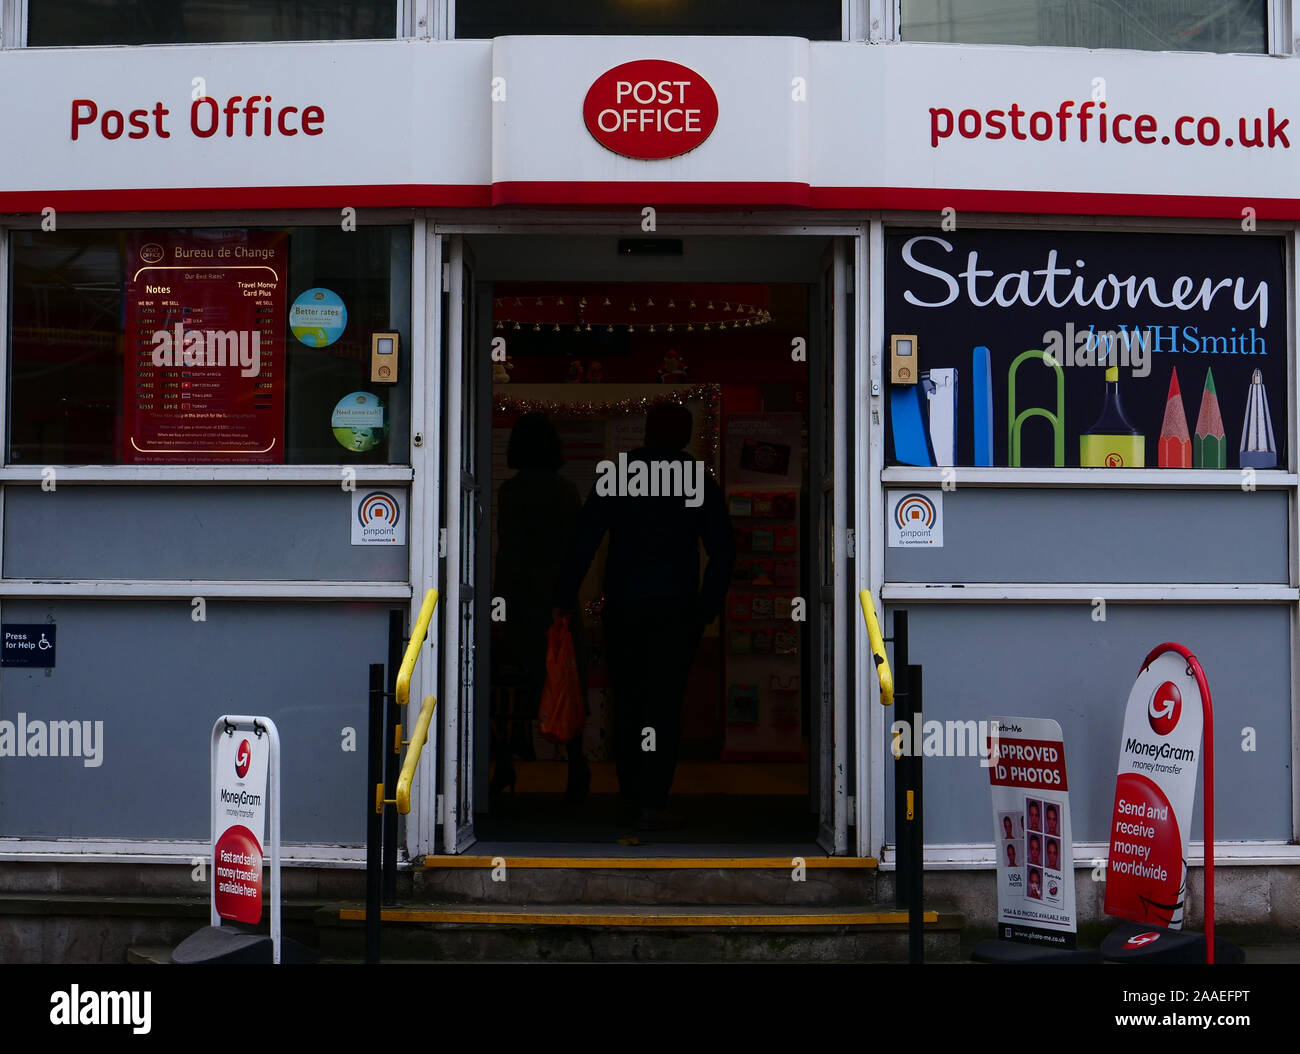 Front and exterior view of post office seen in London, UK, in late November  Stock Photo - Alamy